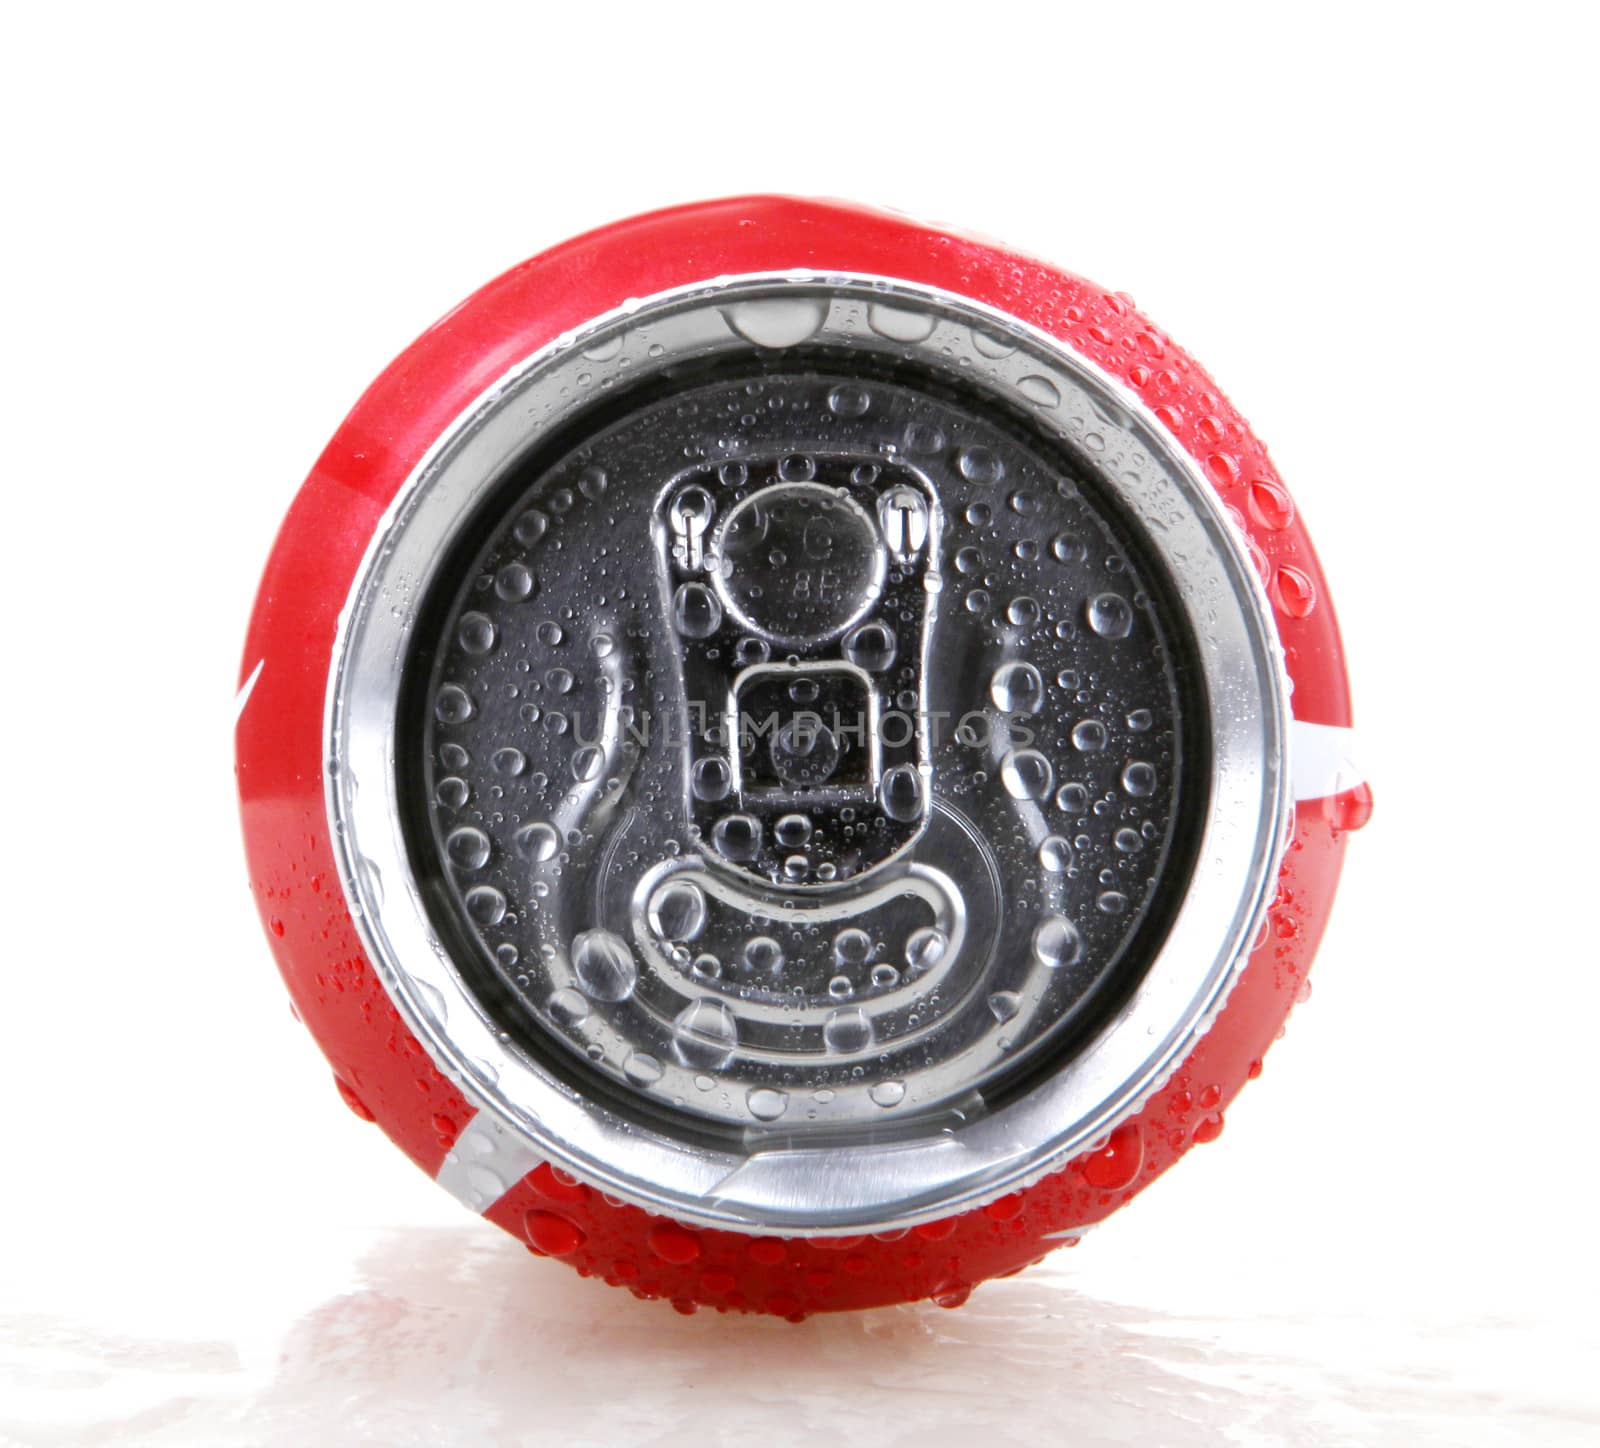 AYTOS, BULGARIA - JANUARY 25, 2014: Coca-Cola bottle can isolated on white background. Coca-Cola is a carbonated soft drink sold in stores, restaurants, and vending machines throughout the world.